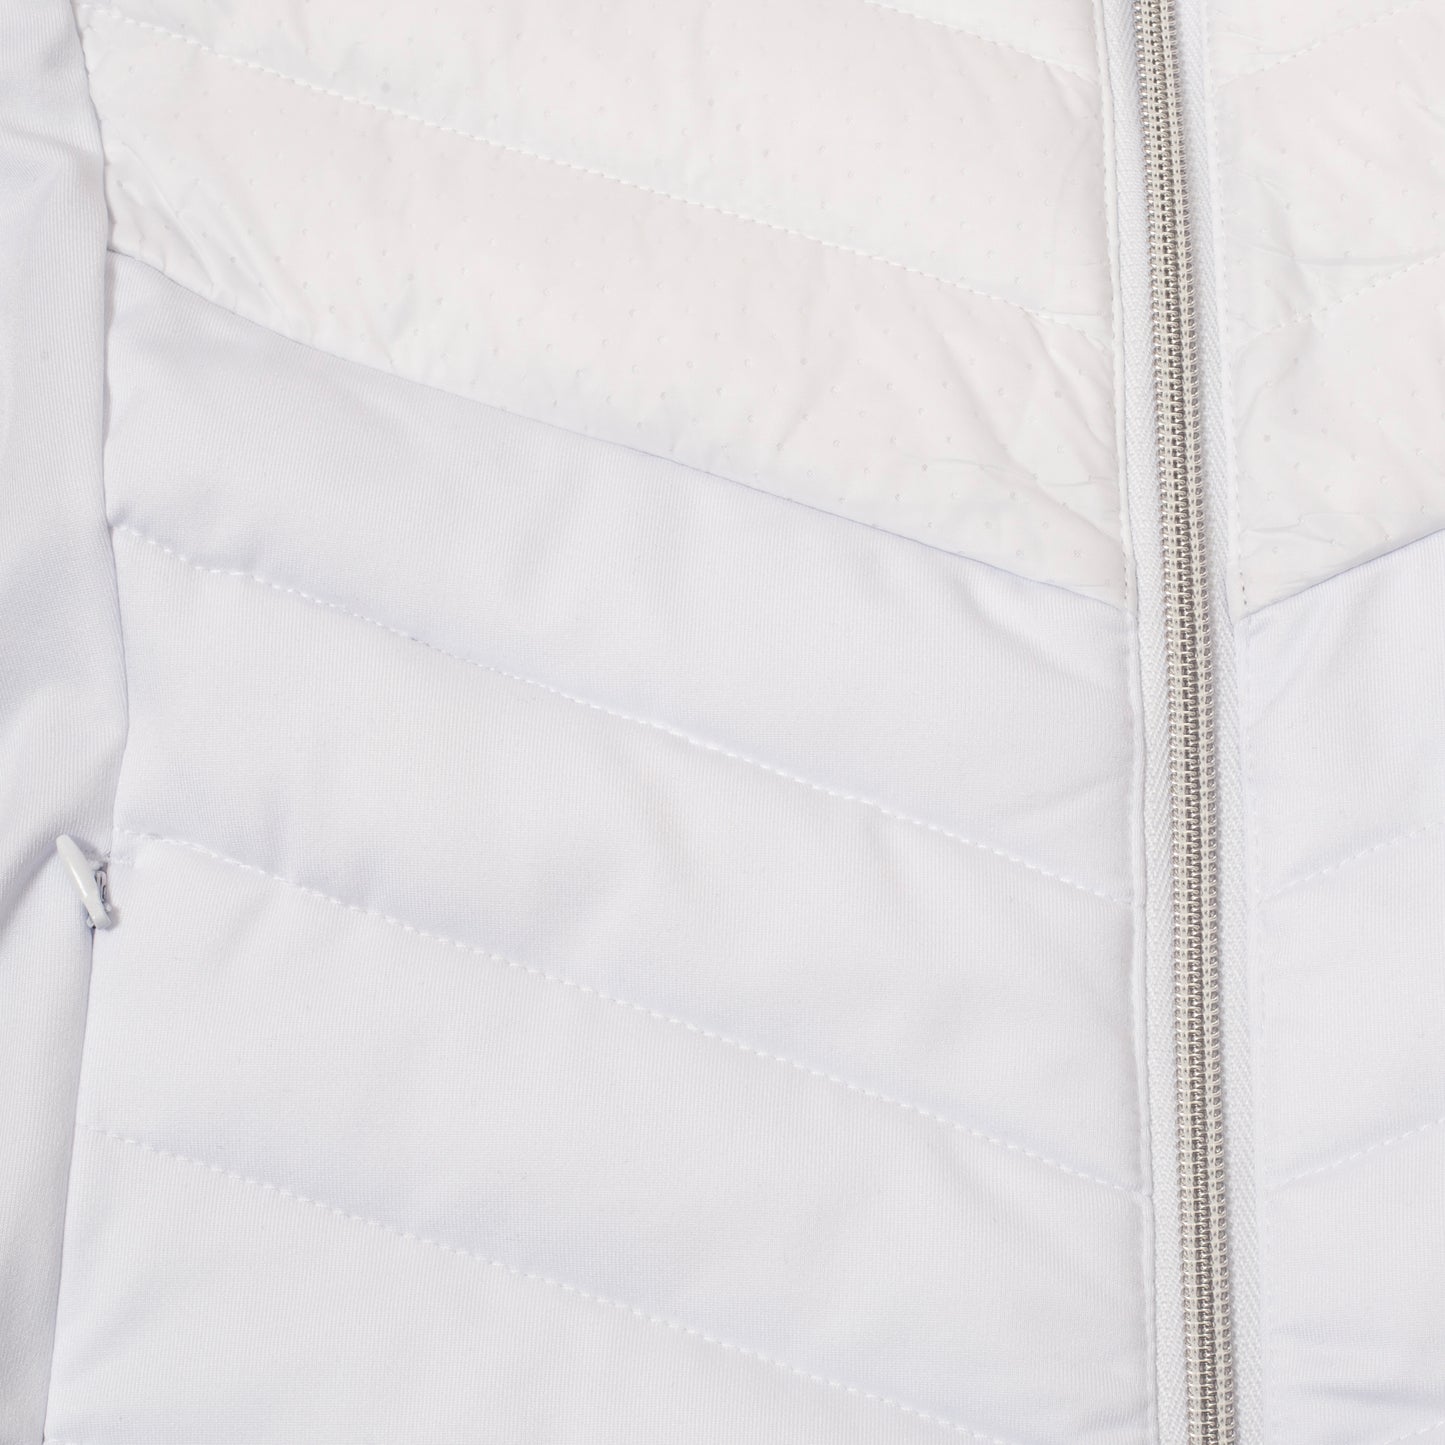 Green Lamb Ladies White Lightweight Front Quilted Gilet